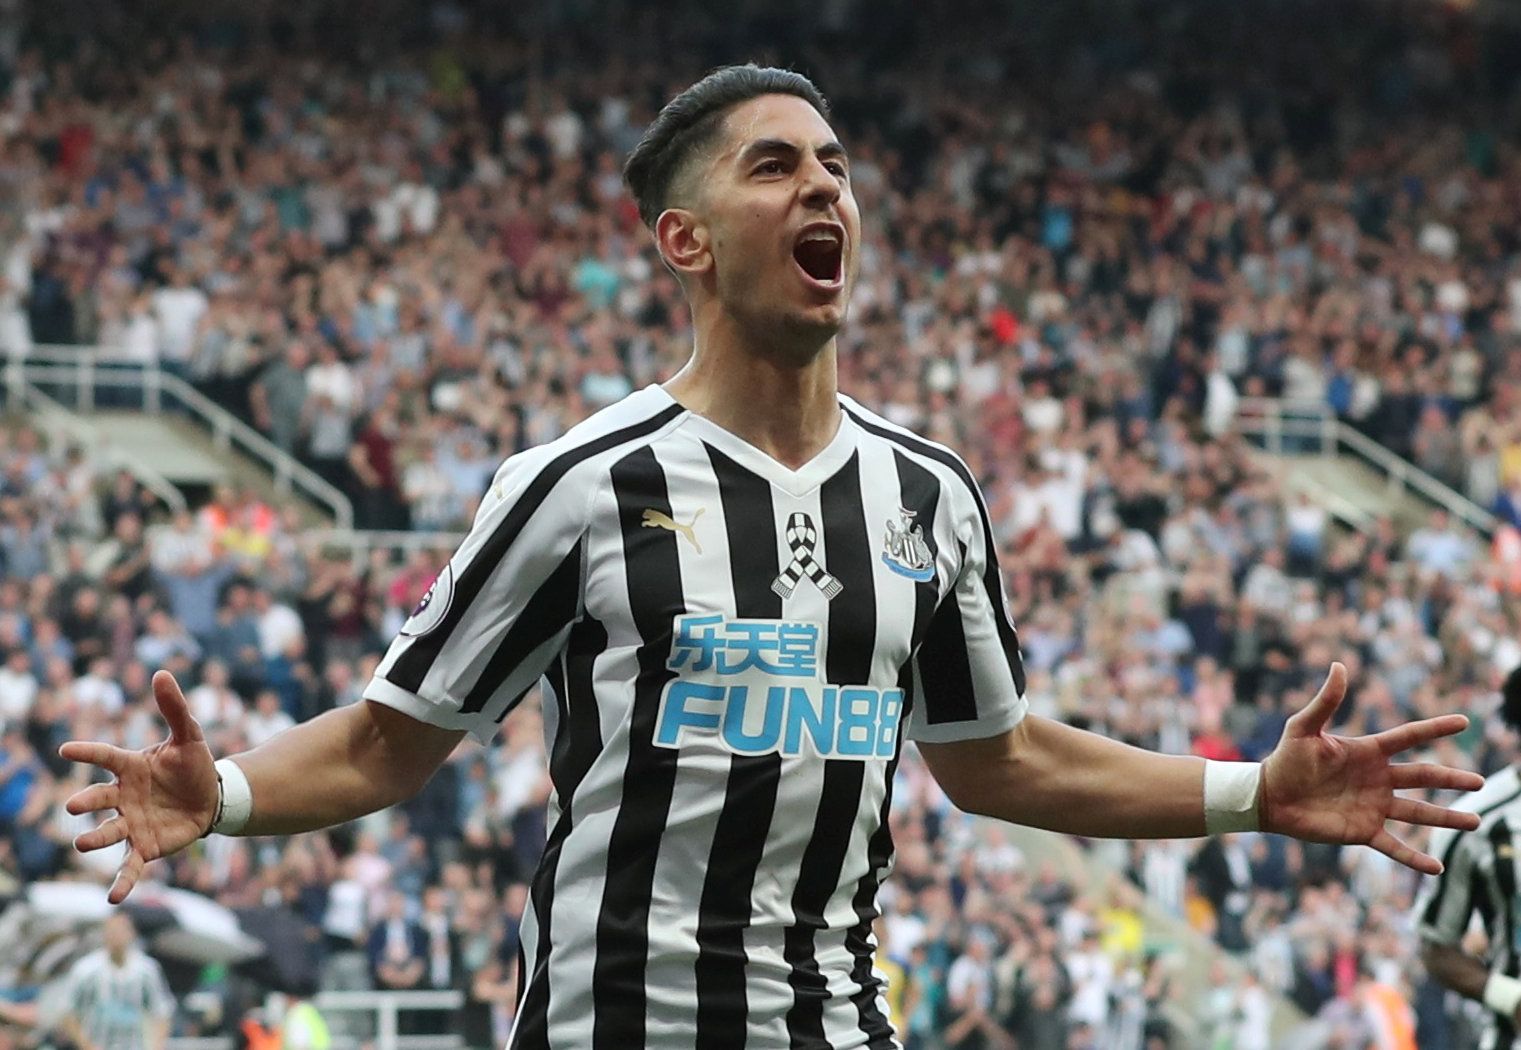 Soccer Football - Premier League - Newcastle United v Southampton - St James' Park, Newcastle, Britain - April 20, 2019  Newcastle United's Ayoze Perez celebrates scoring their third goal to complete his hat-trick  REUTERS/Scott Heppell  EDITORIAL USE ONLY. No use with unauthorized audio, video, data, fixture lists, club/league logos or 